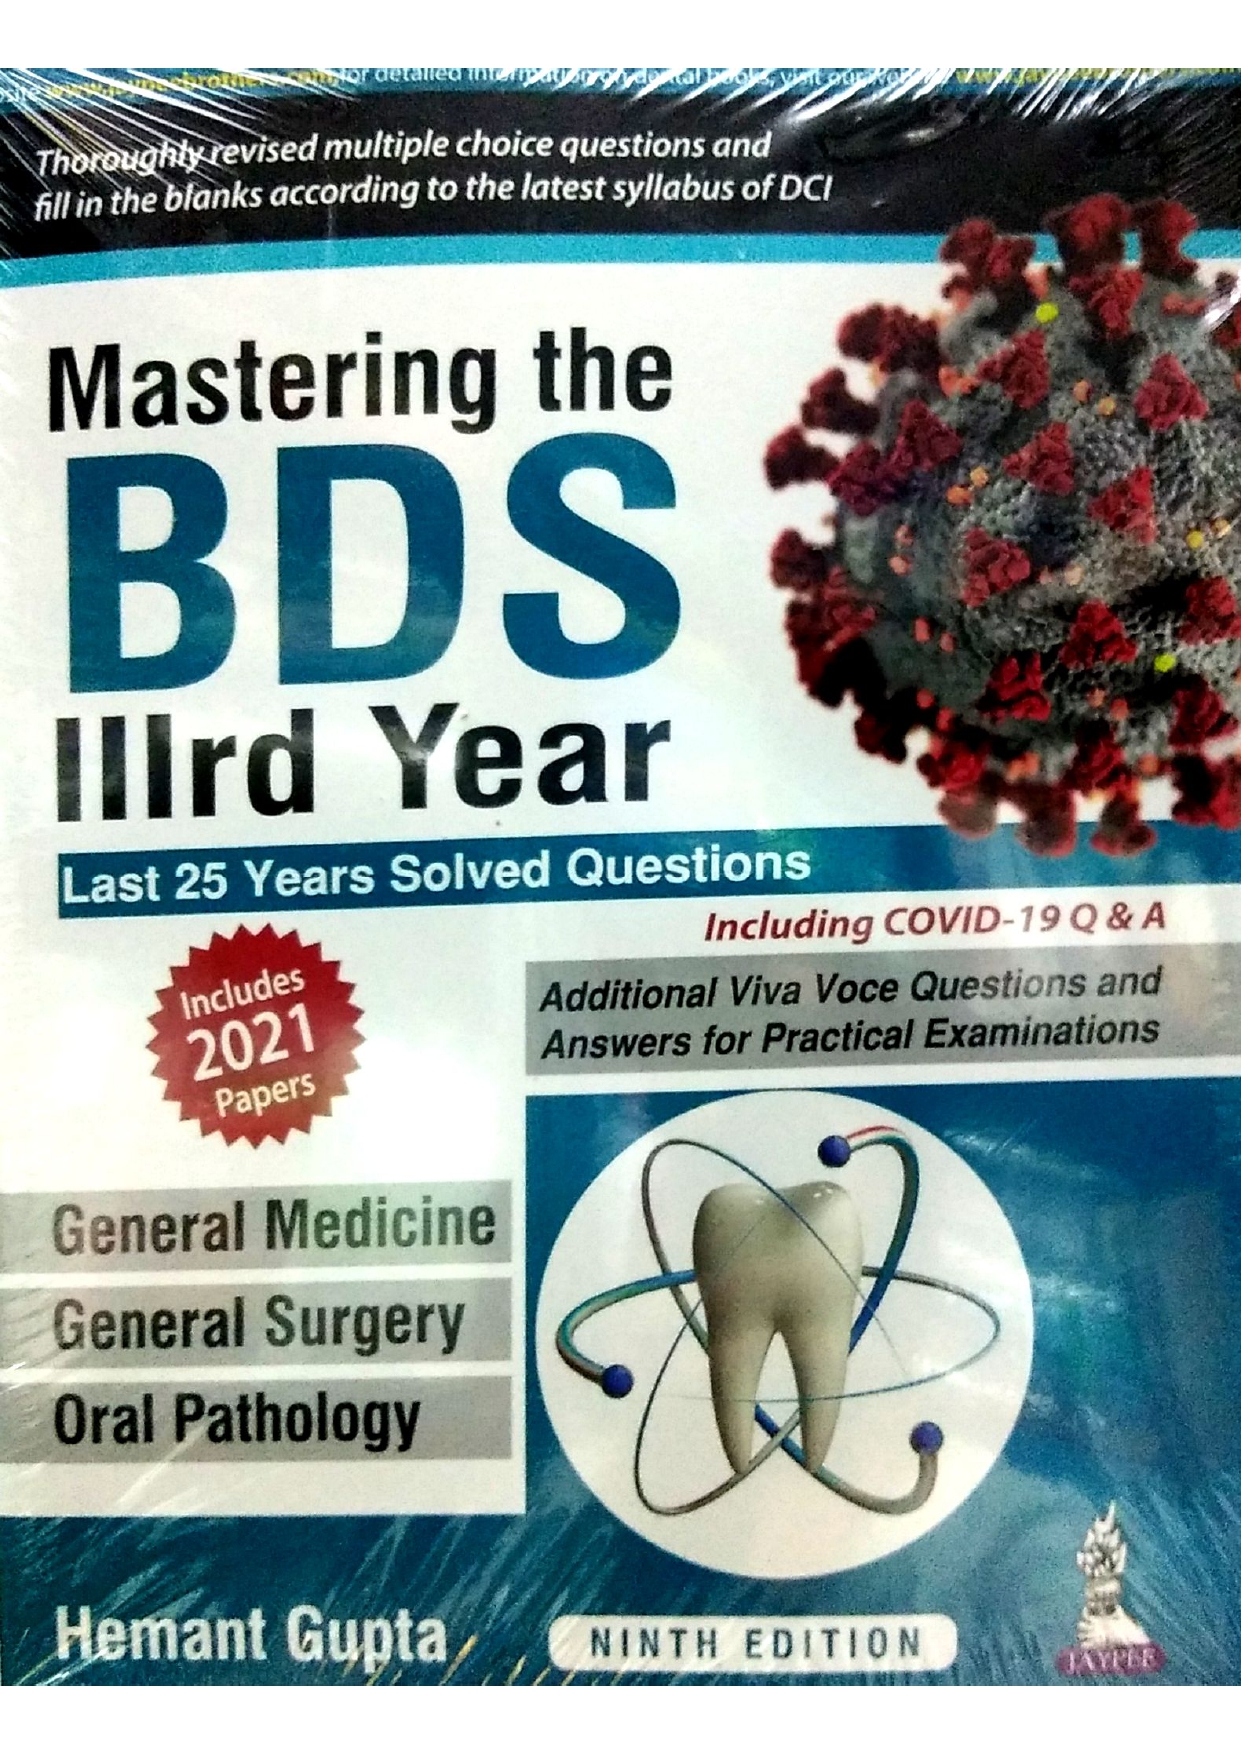 mastering-the-bds-3rd-year